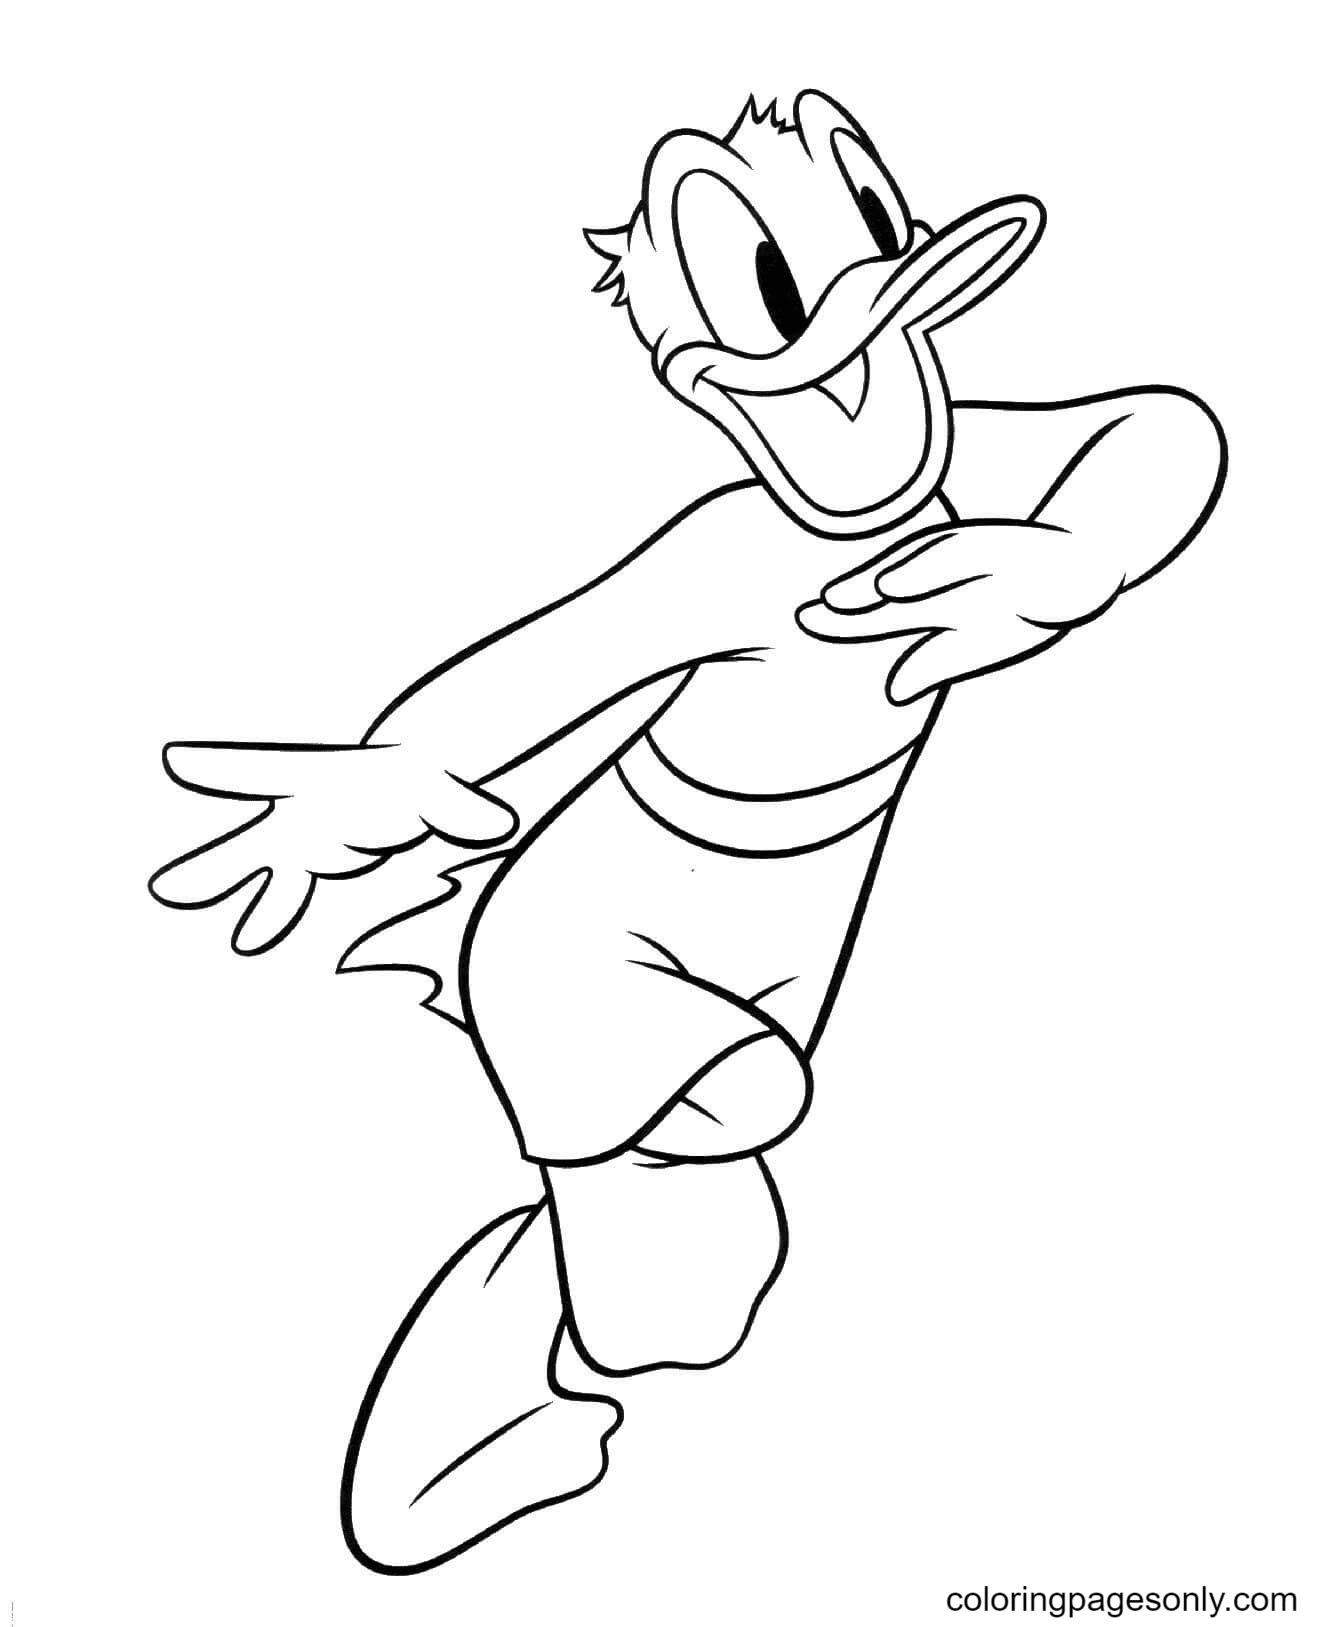 Donald Duck Cute Coloring Page